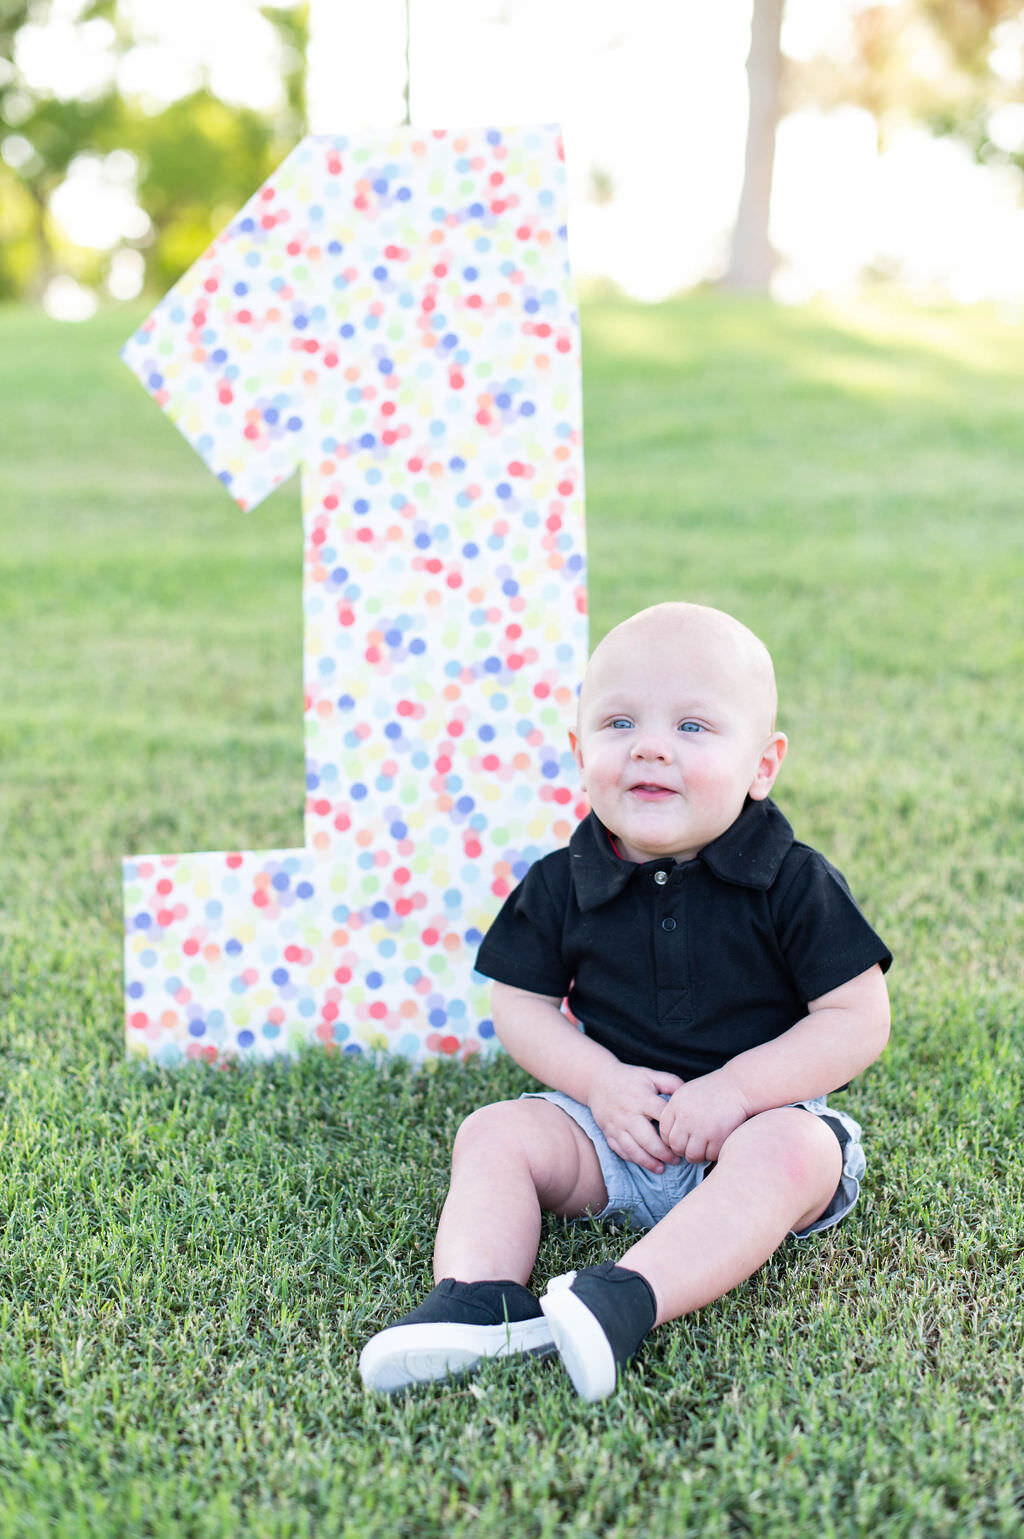 A baby sitting in the grass with a large "1" behind them.